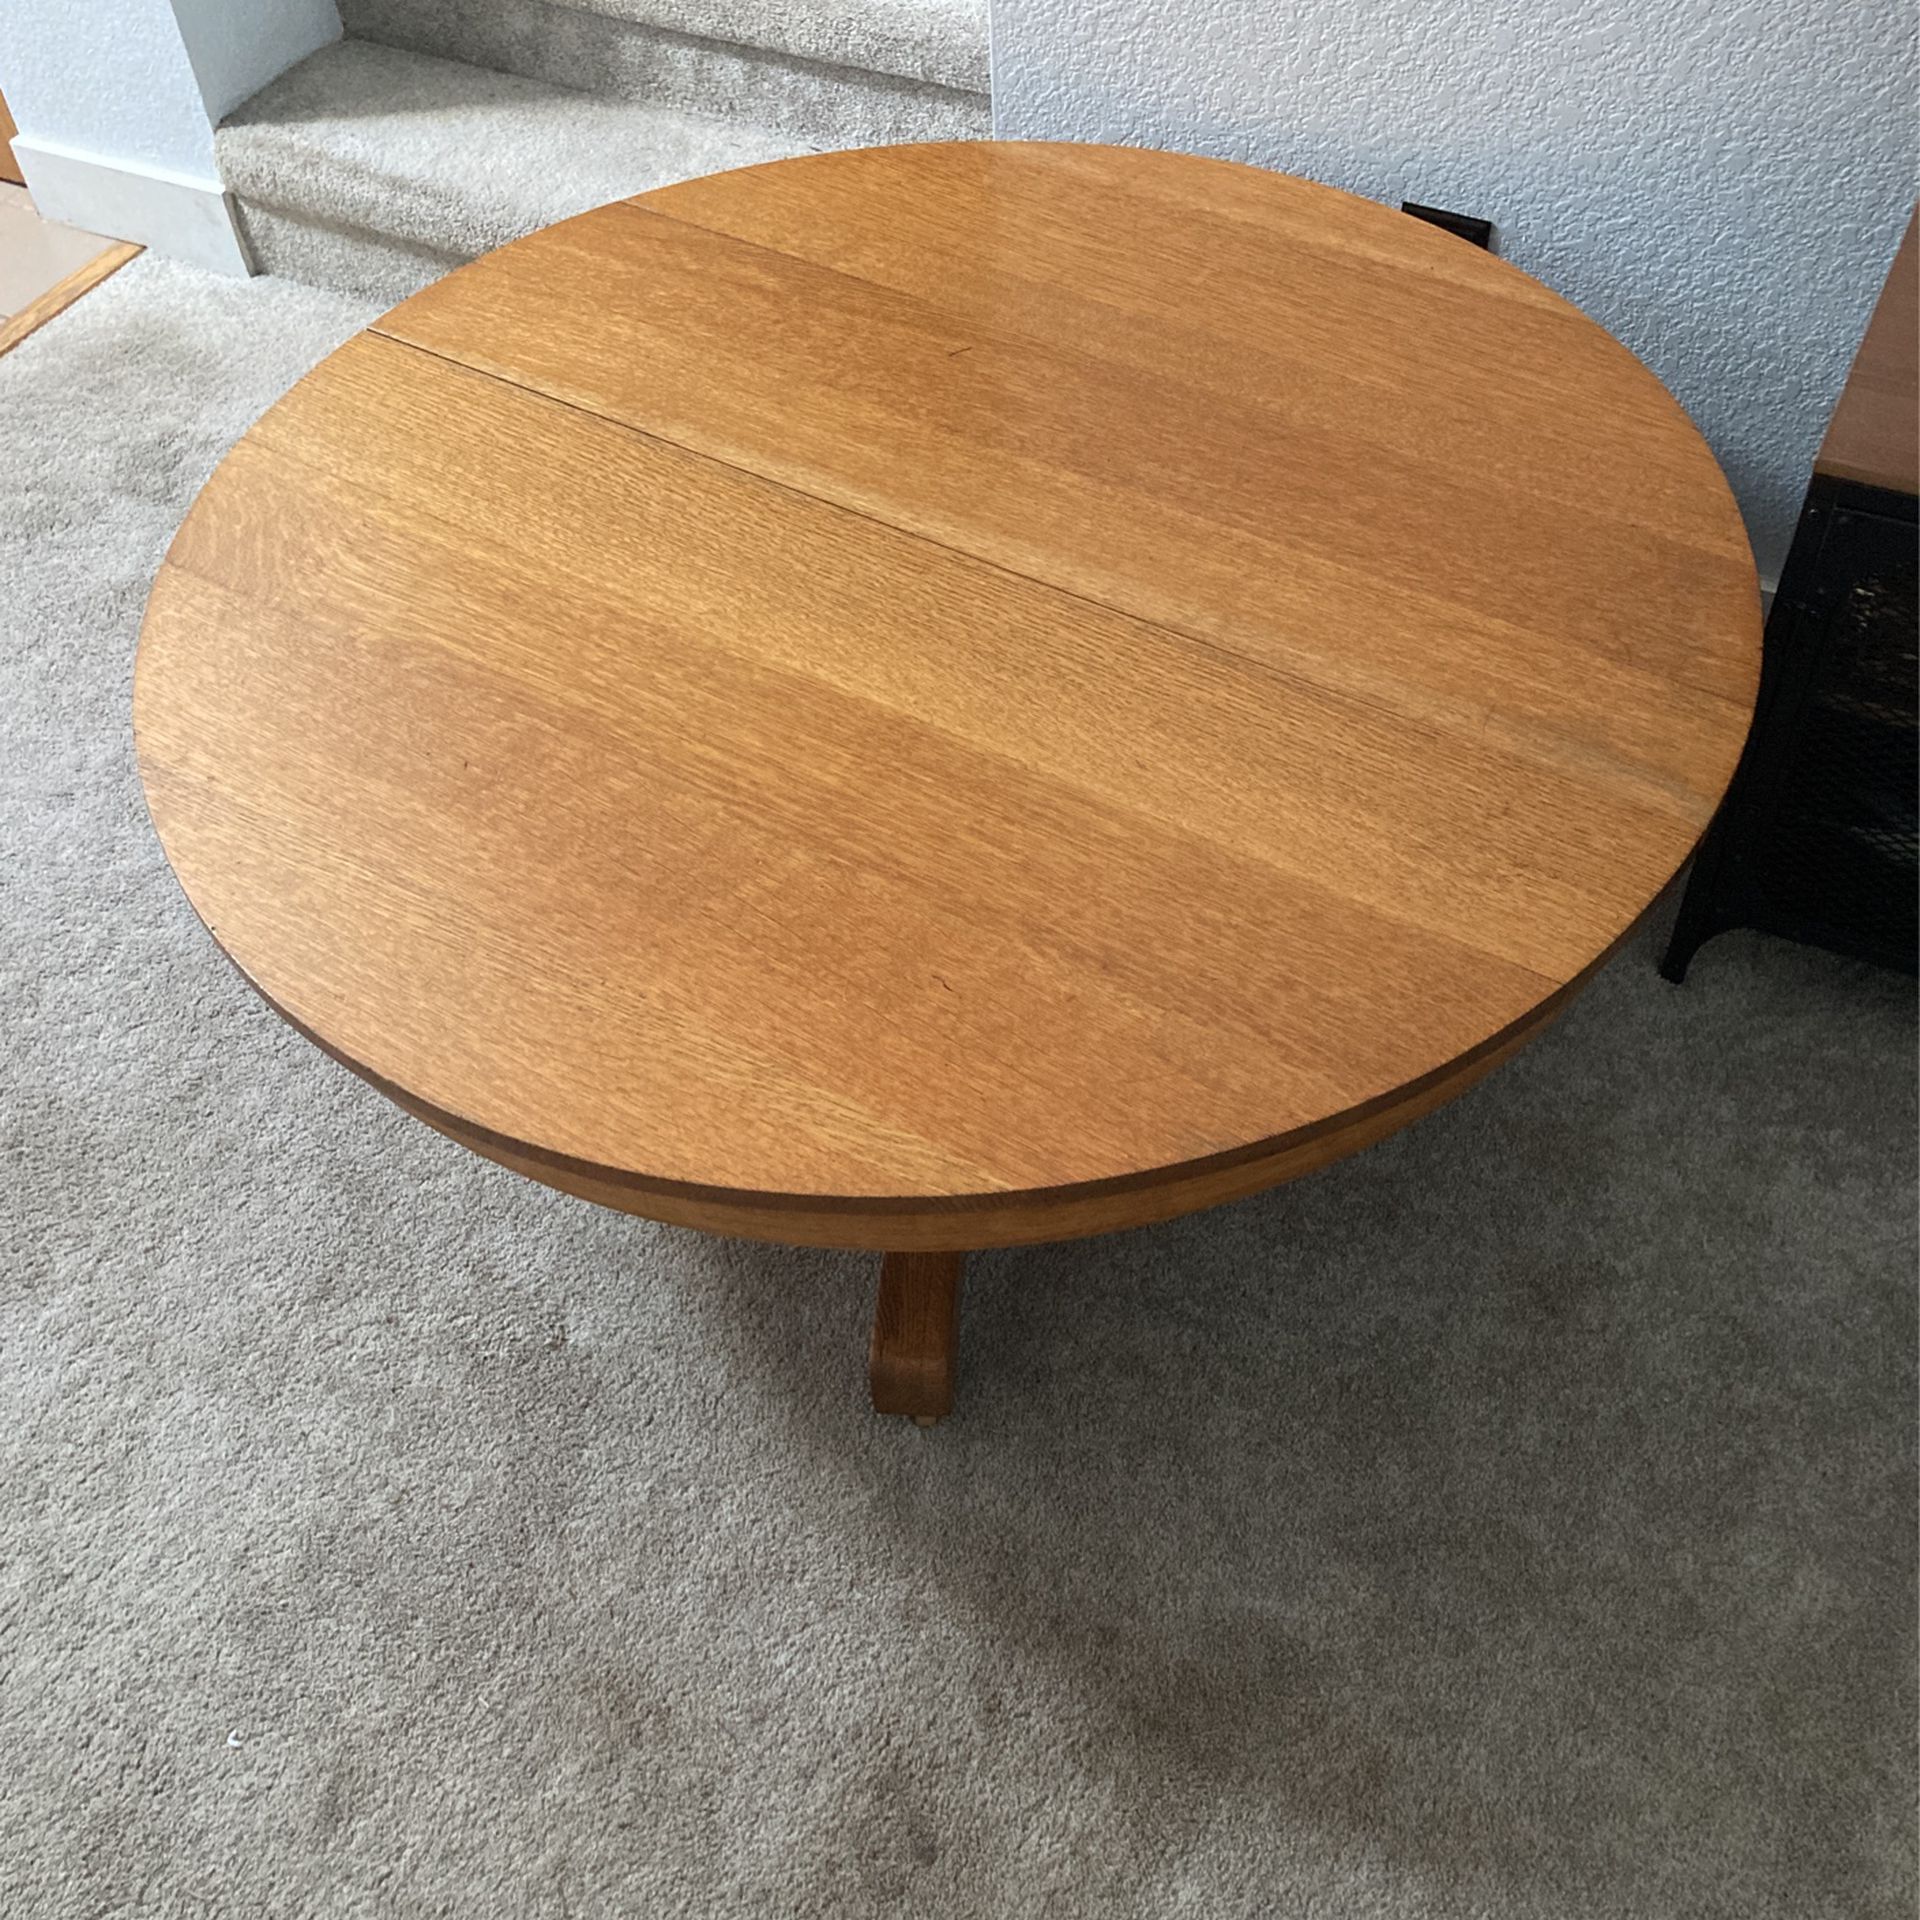 45” Round Solid Wood Coffee Table